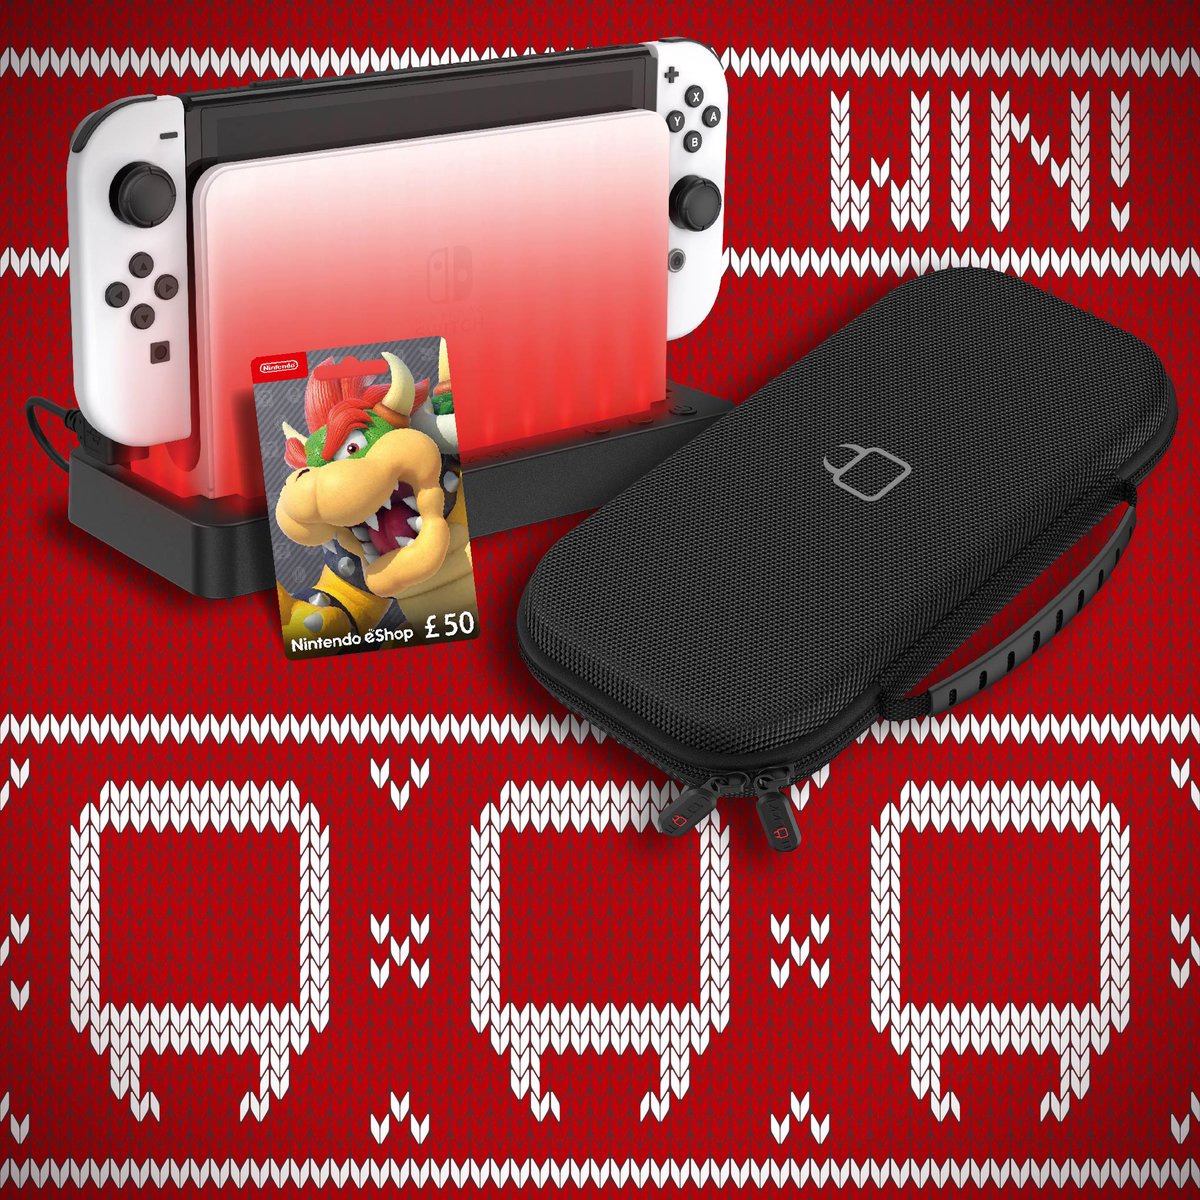 🎄🎁 CHRISTMAS GIVEAWAY 🎁🎄 WIN this Venom Switch Bundle INCLUDING Nintendo Switch OLED and a £50 Nintendo eShop voucher in time for Christmas! One winner will be selected Wednesday 20th December 🌟 Like this post 🌟 Share this post 🌟 Comment your favourite Christmas movie